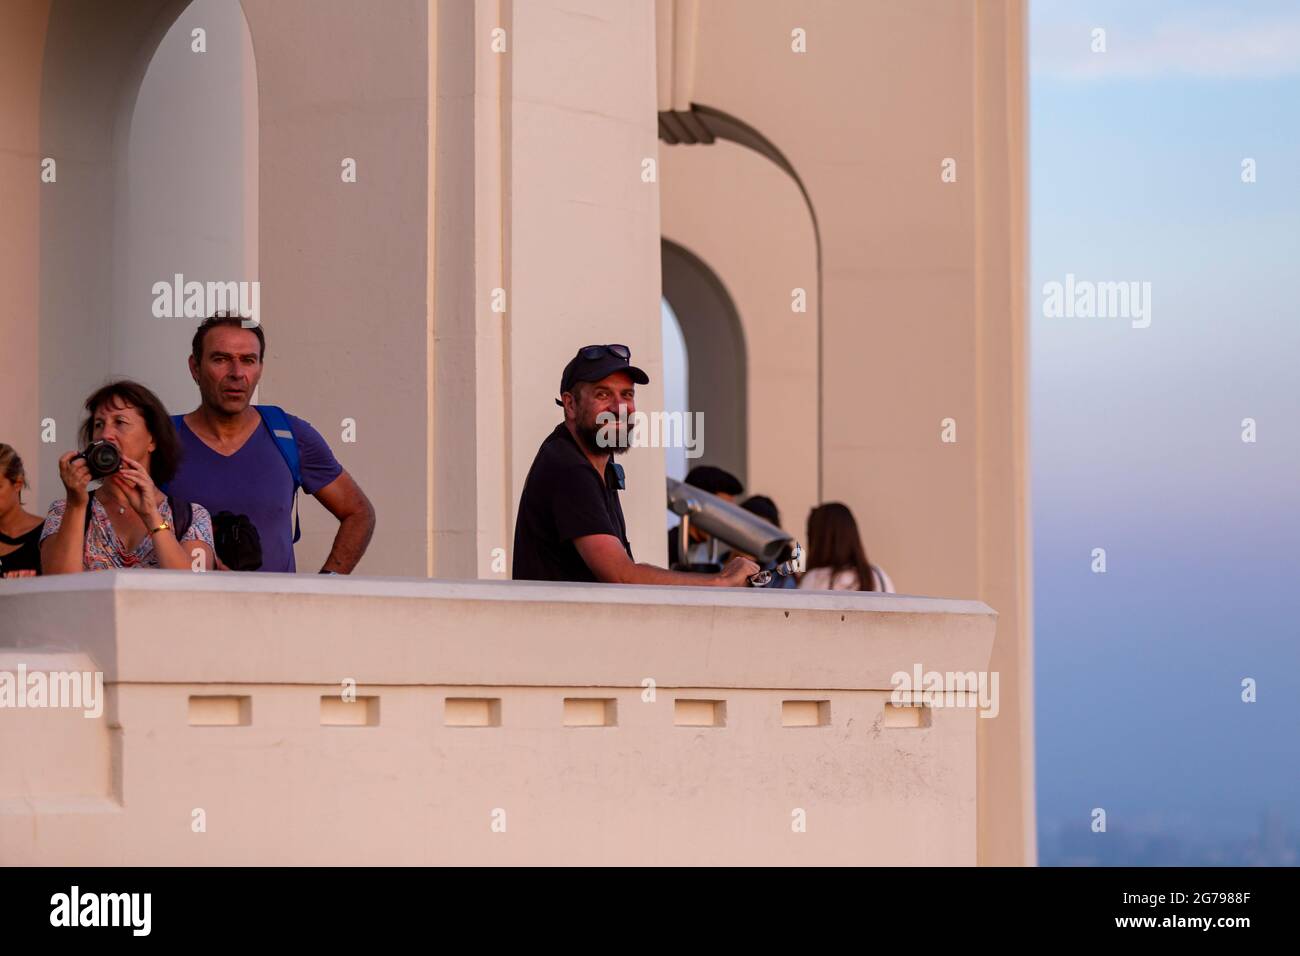 A caucasian Man, 45-50, at the balcony of the Griffith-Museum in Los Angeles, California, USA Stock Photo